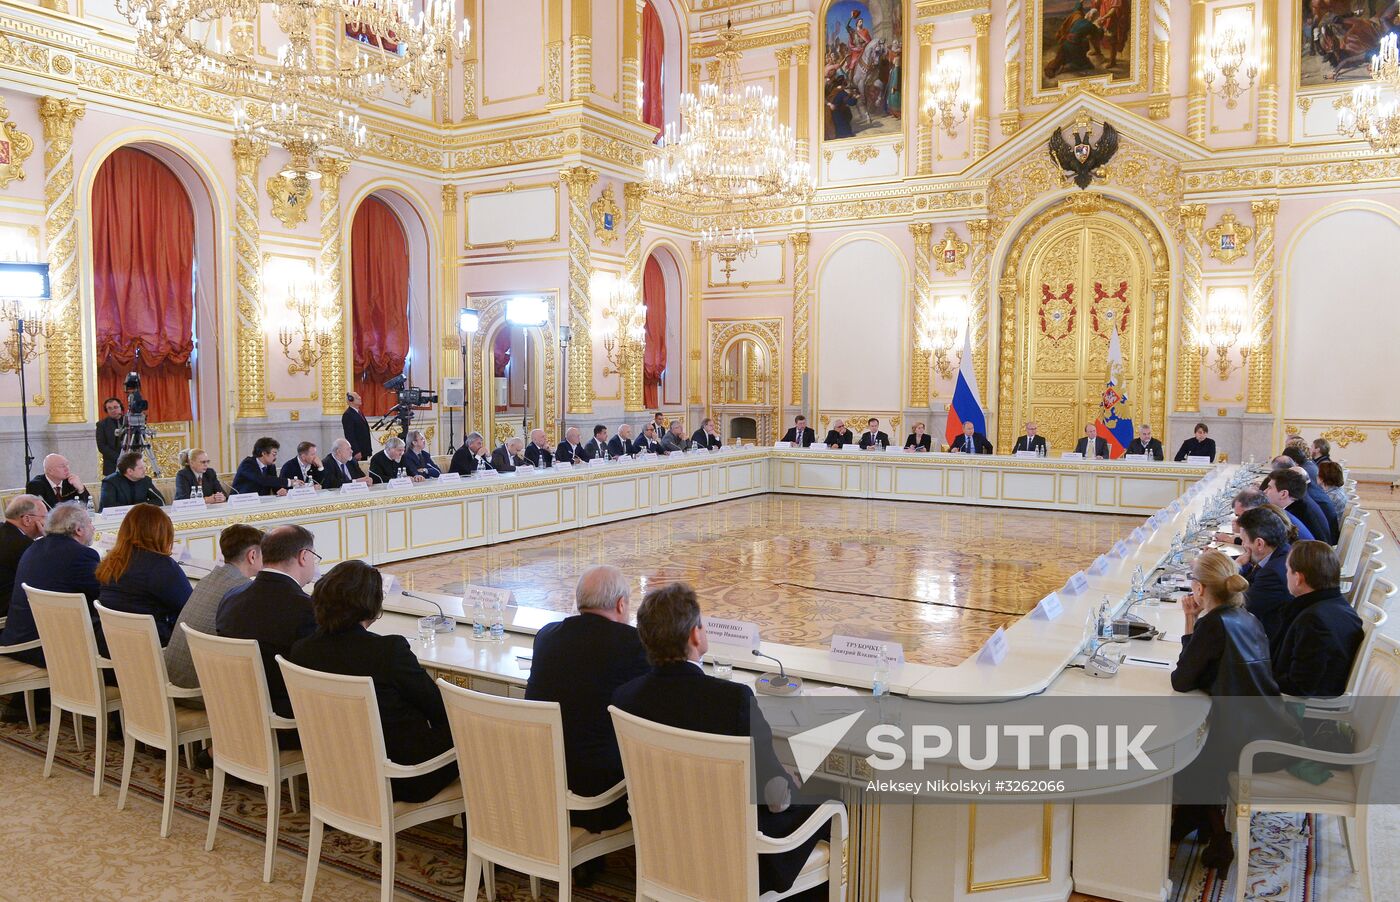 President Vladimir Putin chairs meeting of Council for Culture and Art